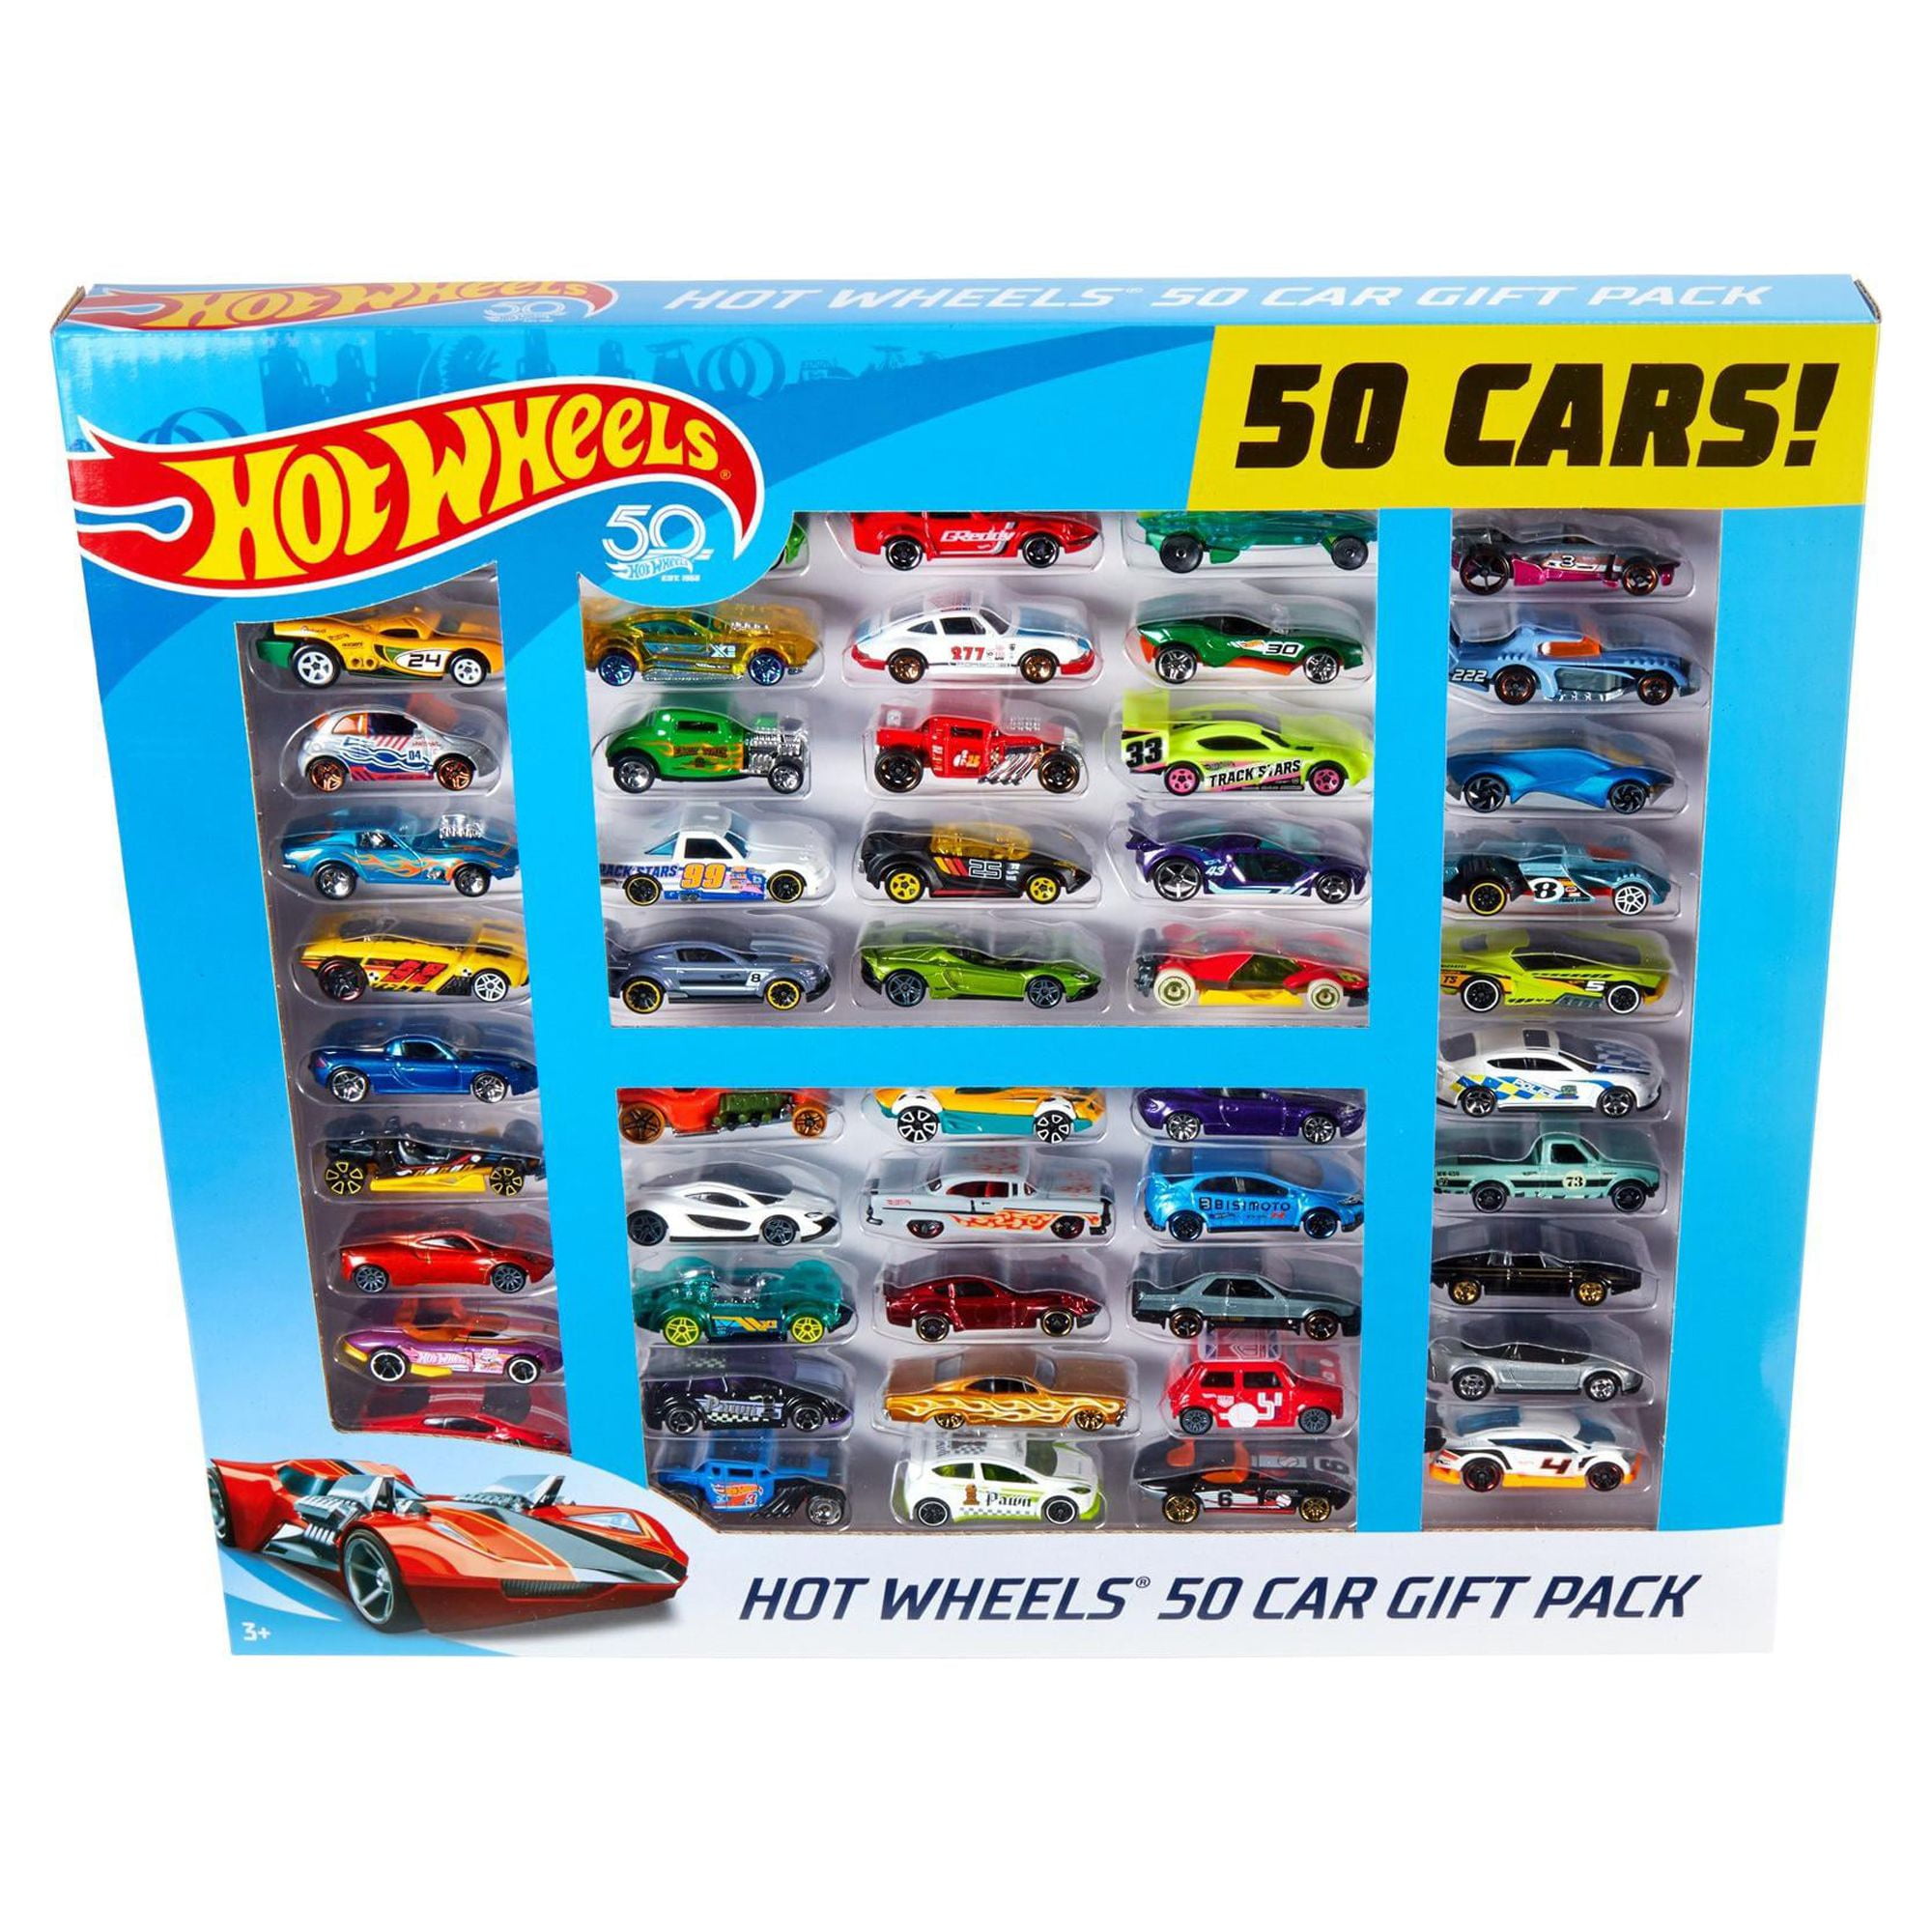 Hot Wheels Ultimate Collectors Gift Pack Car Vehicle Playset (50